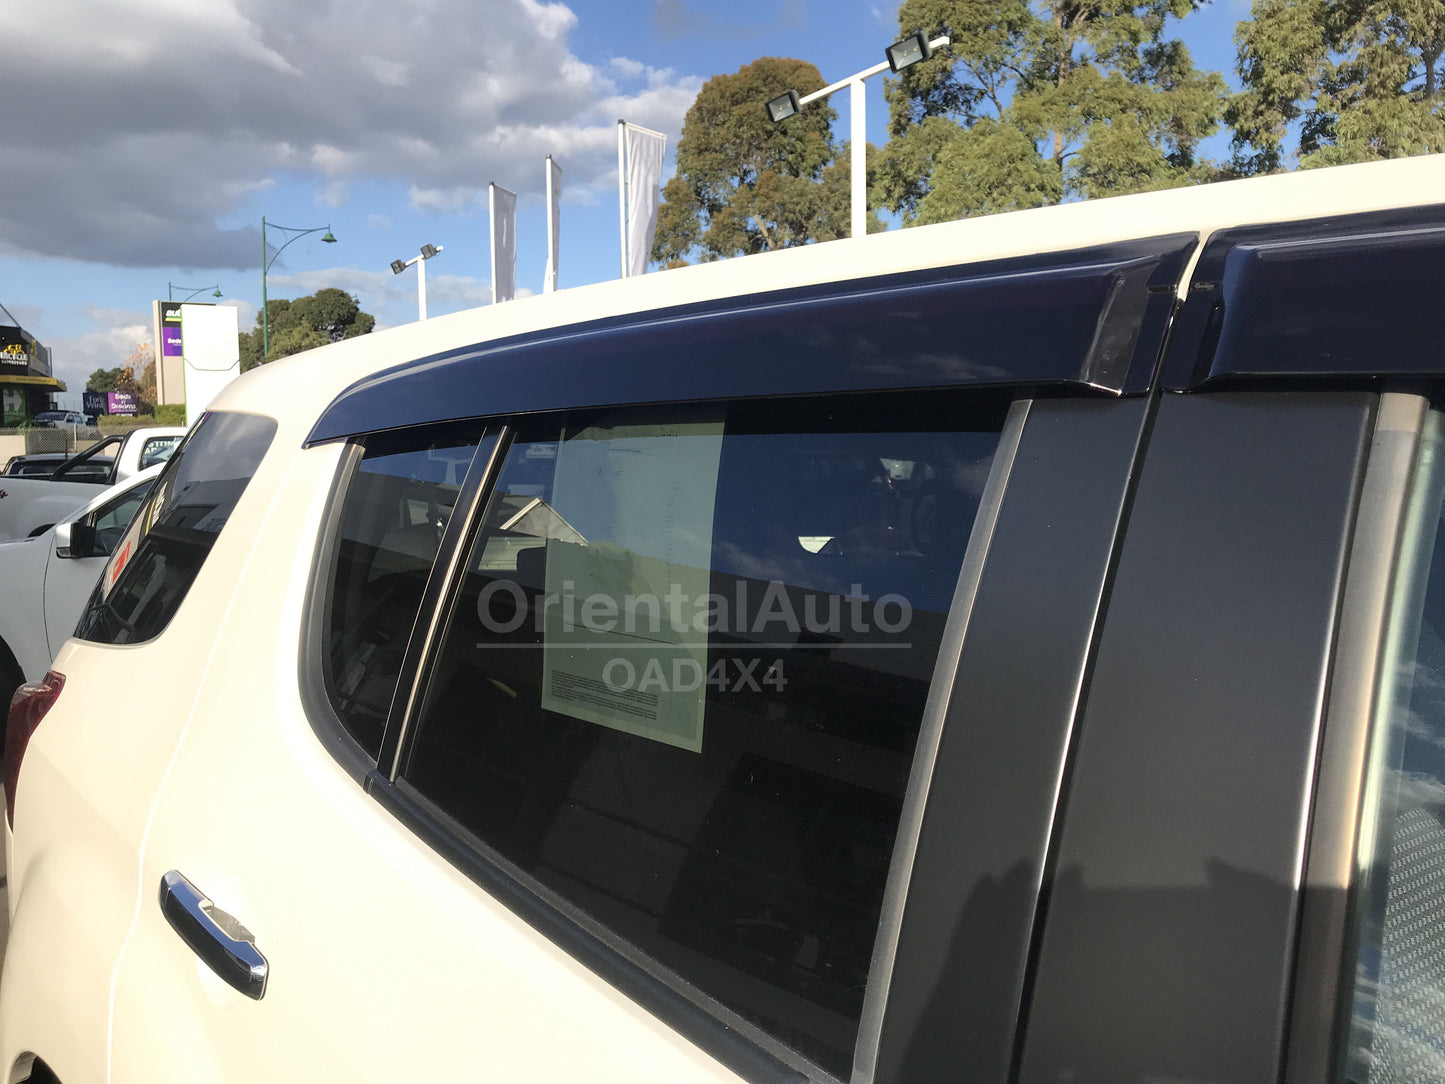 Bonnet Protector & Injection Weathershields Weather Shields Window Visor For Holden Colorado 7 RG Series 2012-2016